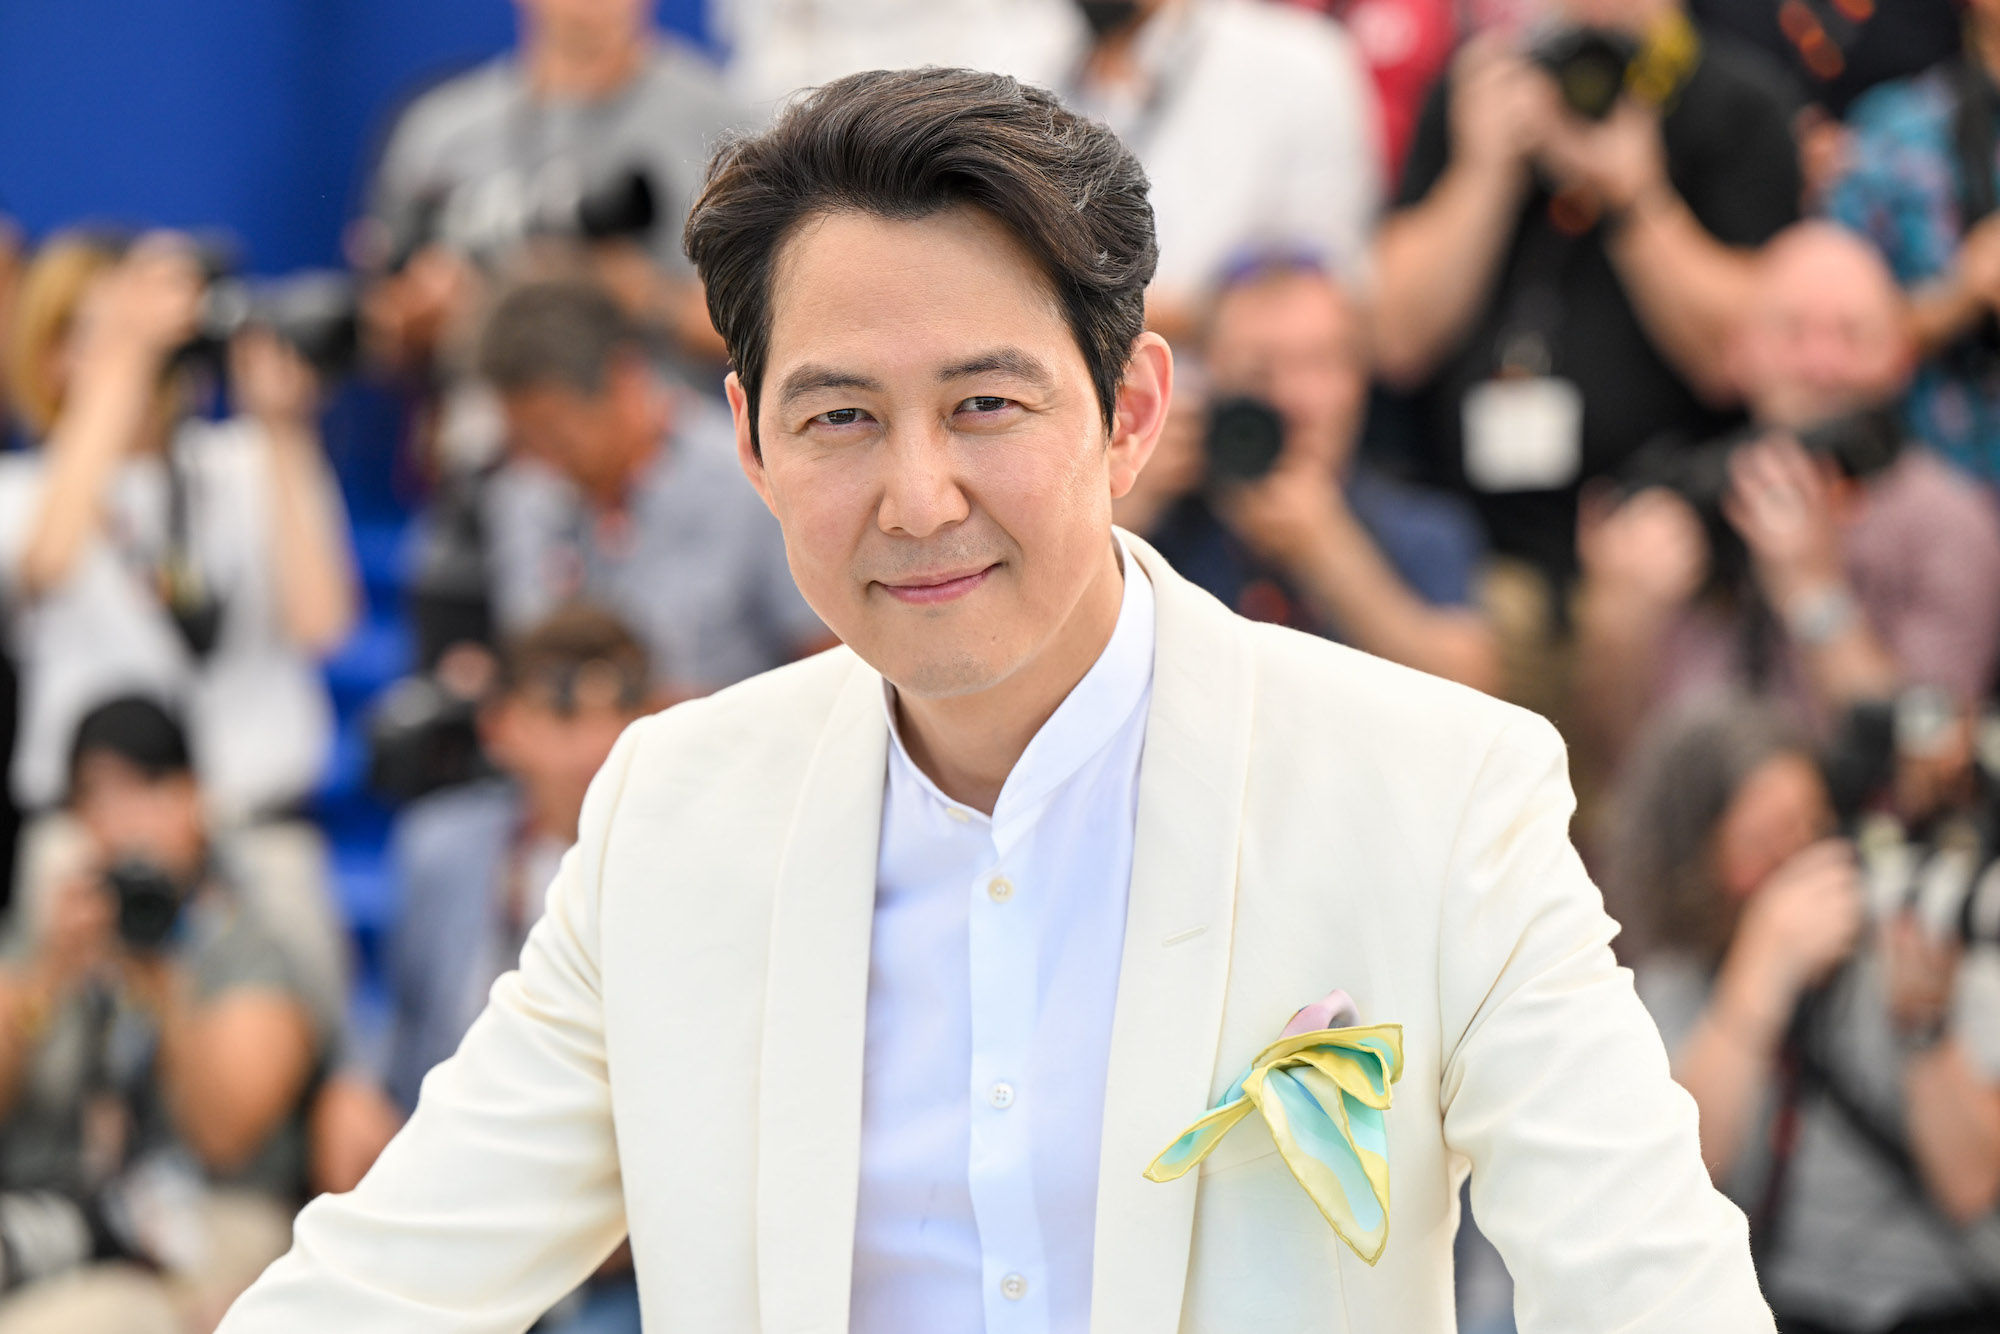 Squid Game' Stars Lee Jung-jae, Jung Ho-yeon on Their Emmy Style